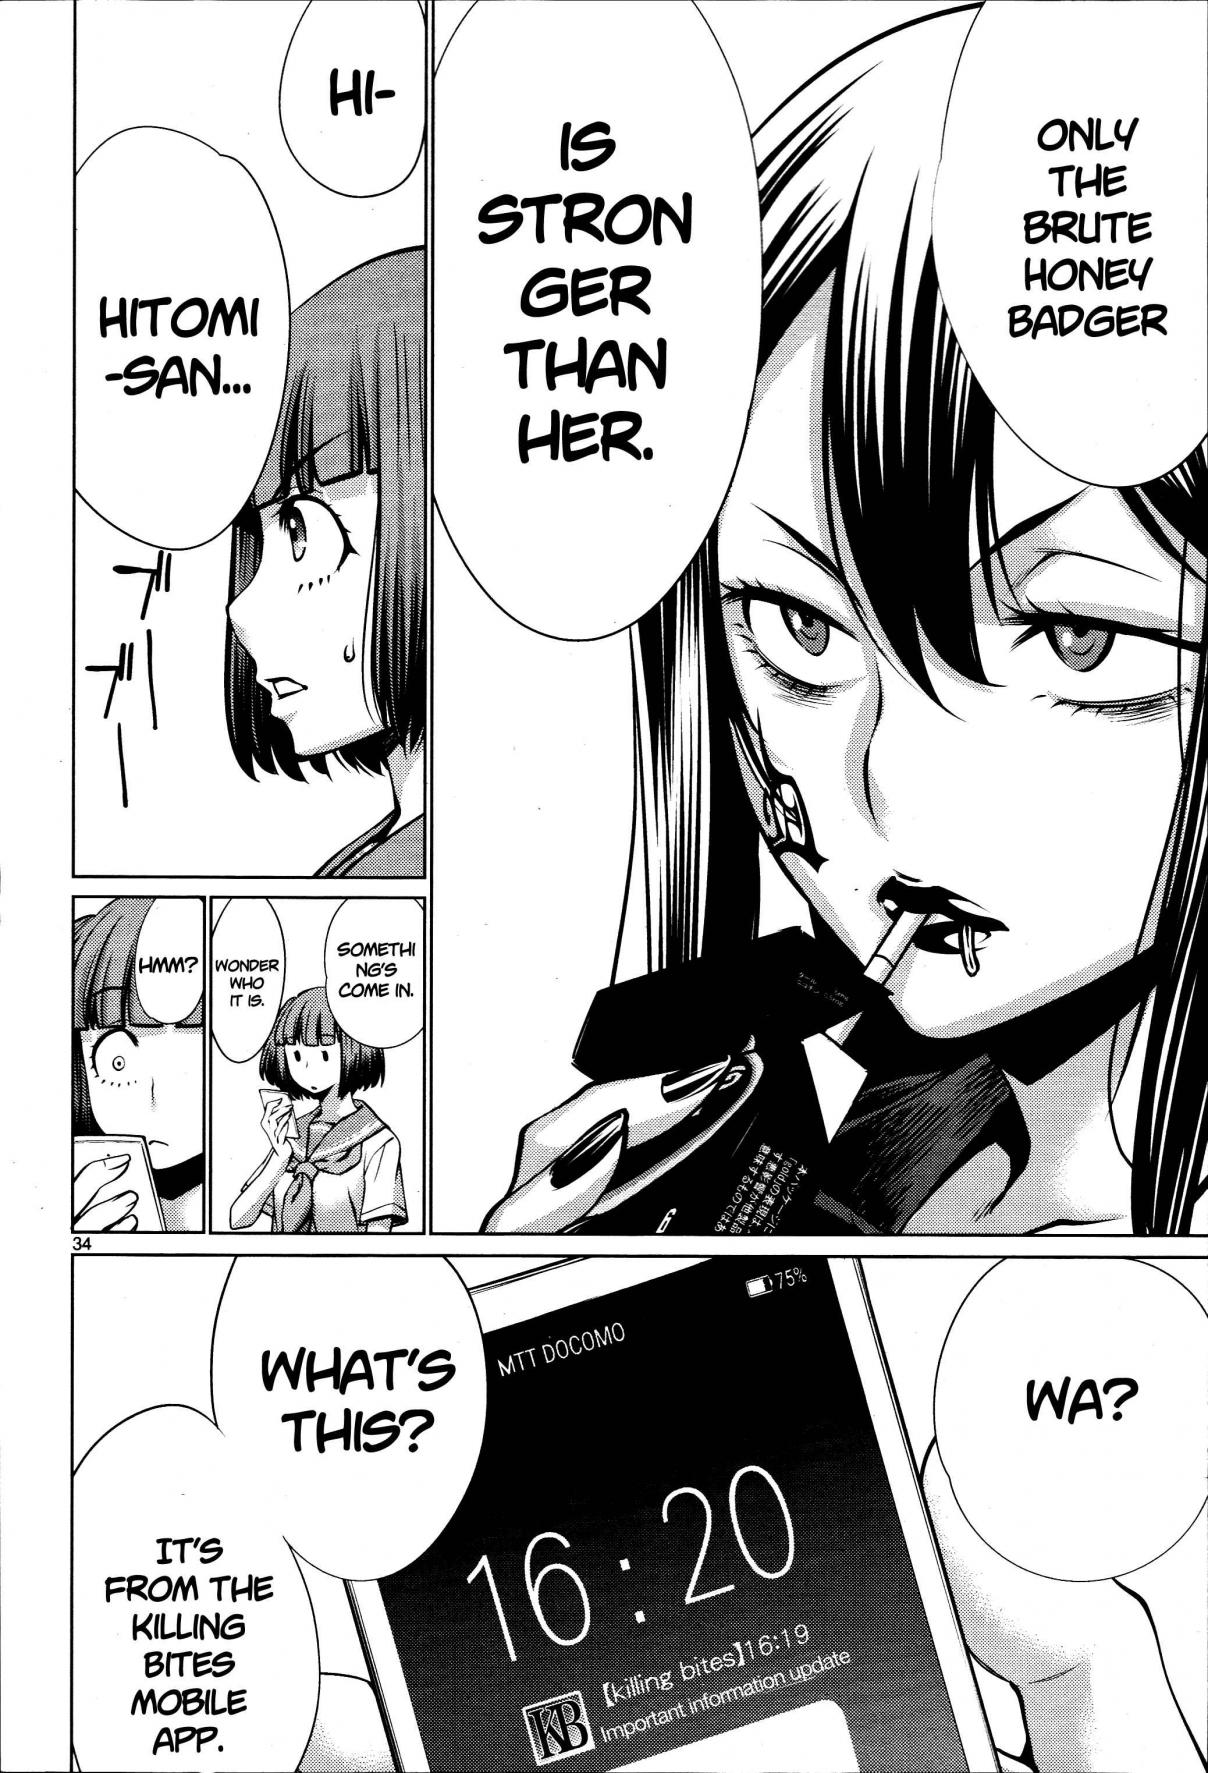 Killing Bites Vol. 15 Ch. 70 "If You Like 'em That Much, I'll Give it to You."